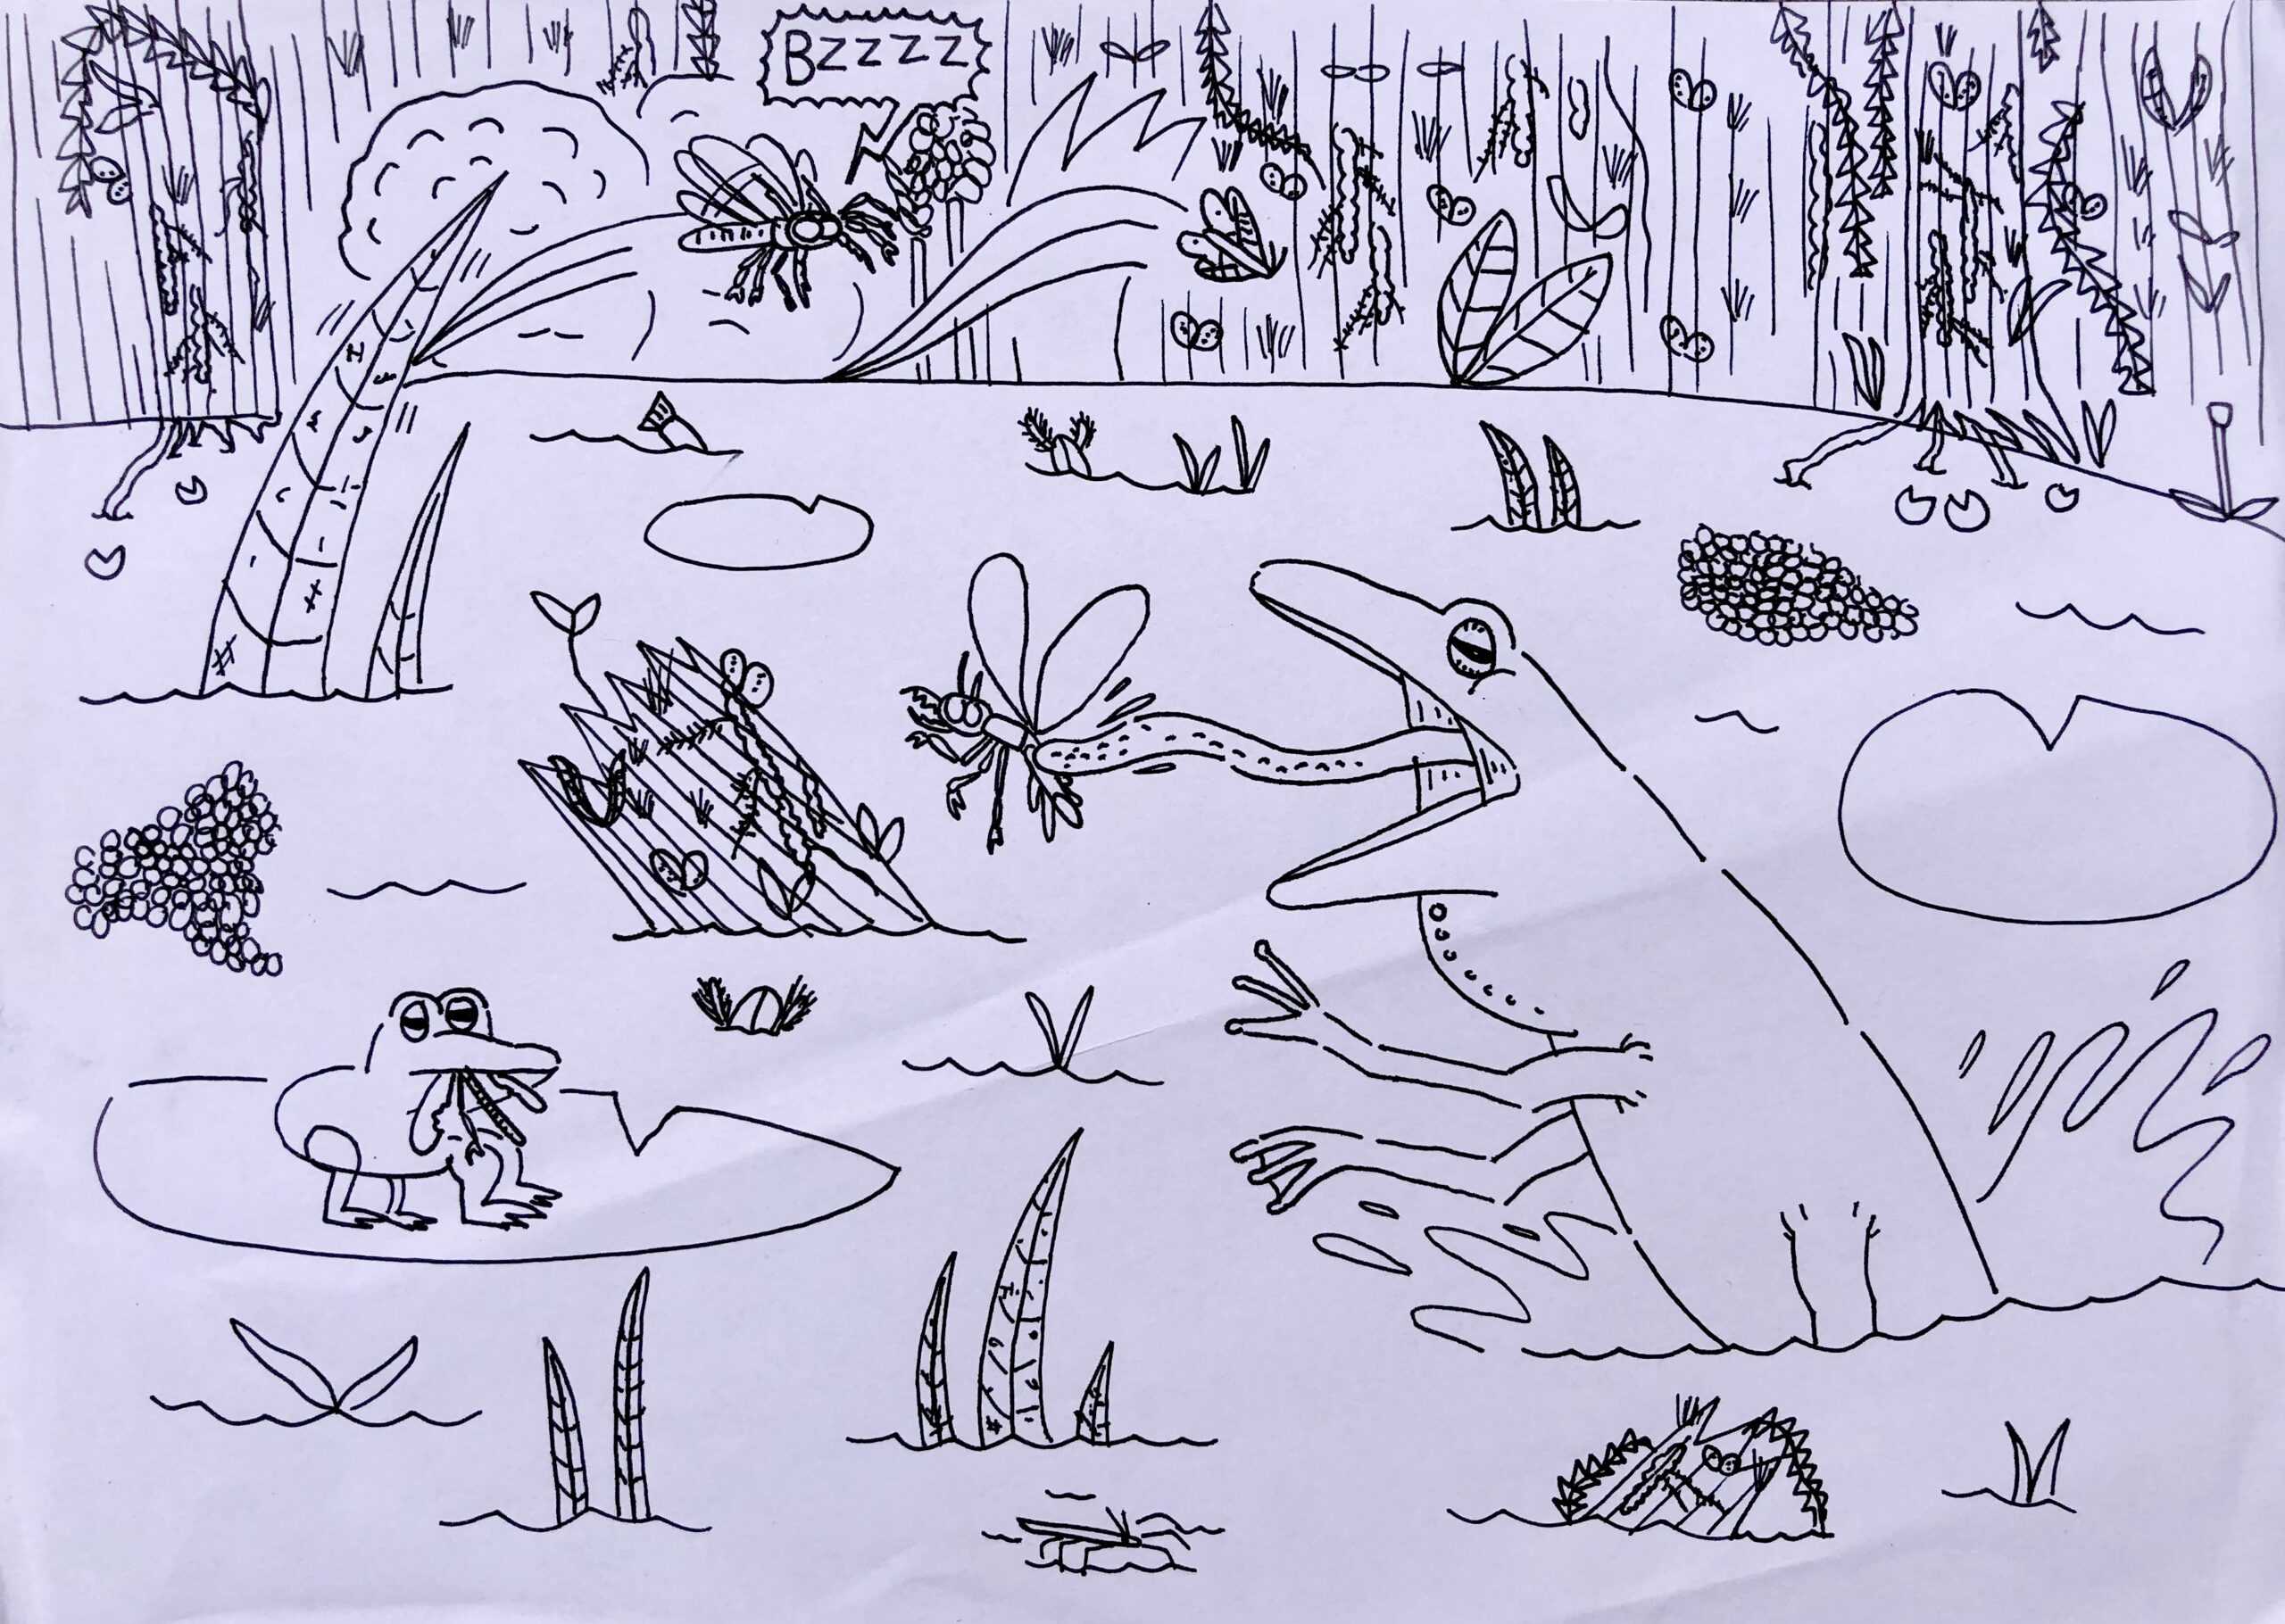 Predators at the Swamp by Isaac Turtle, Winner of Moving Insects category, Insect Week 2022 art competition